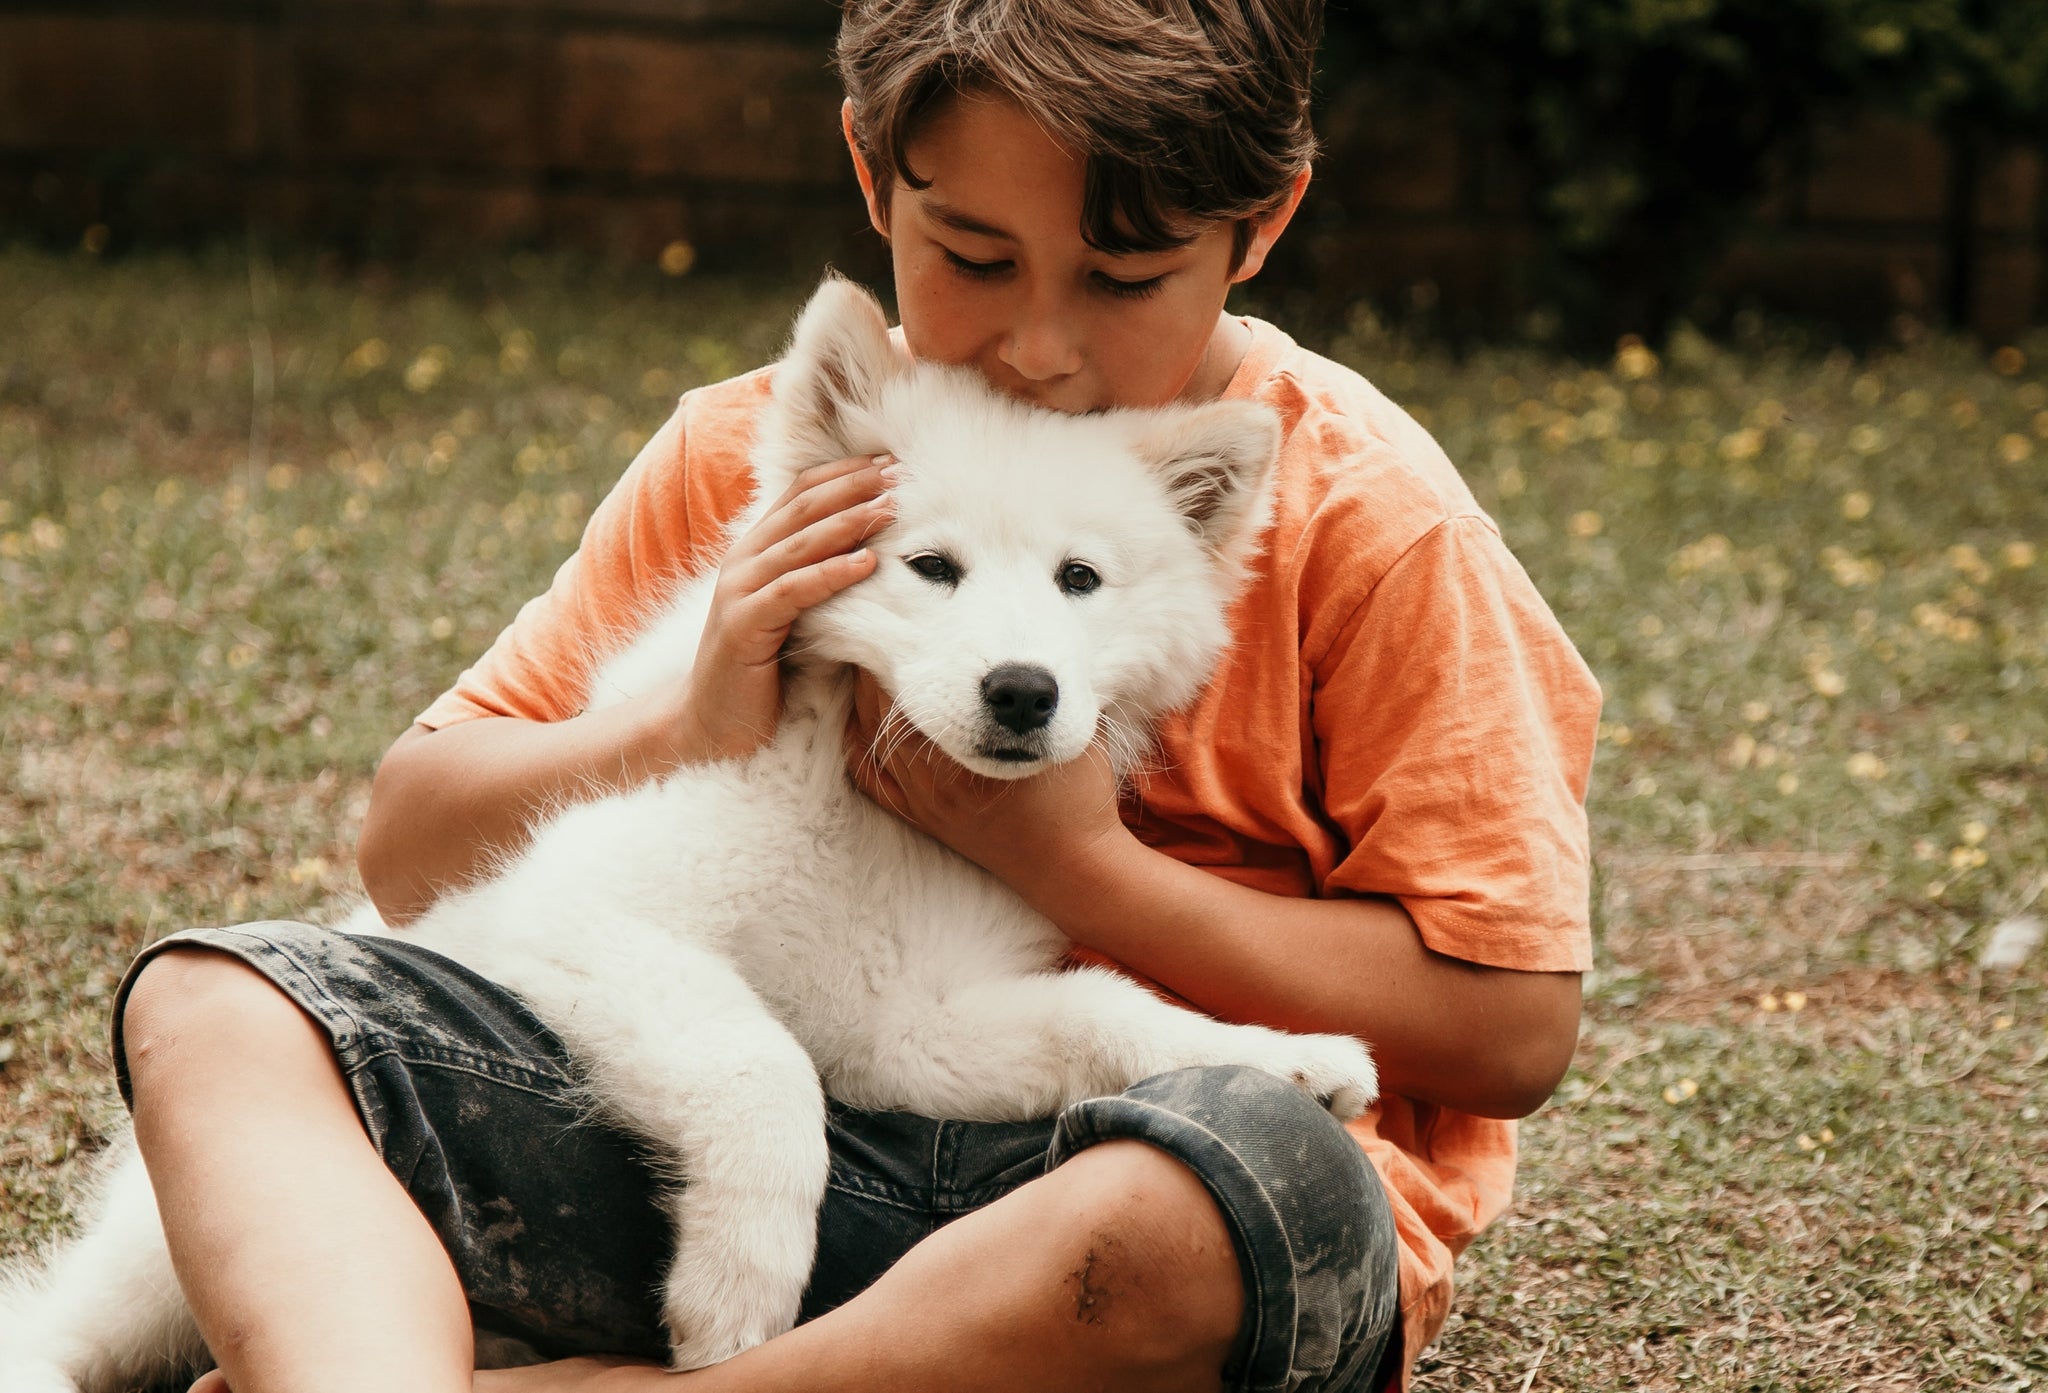 Common mistakes : Introducing a dog to a child